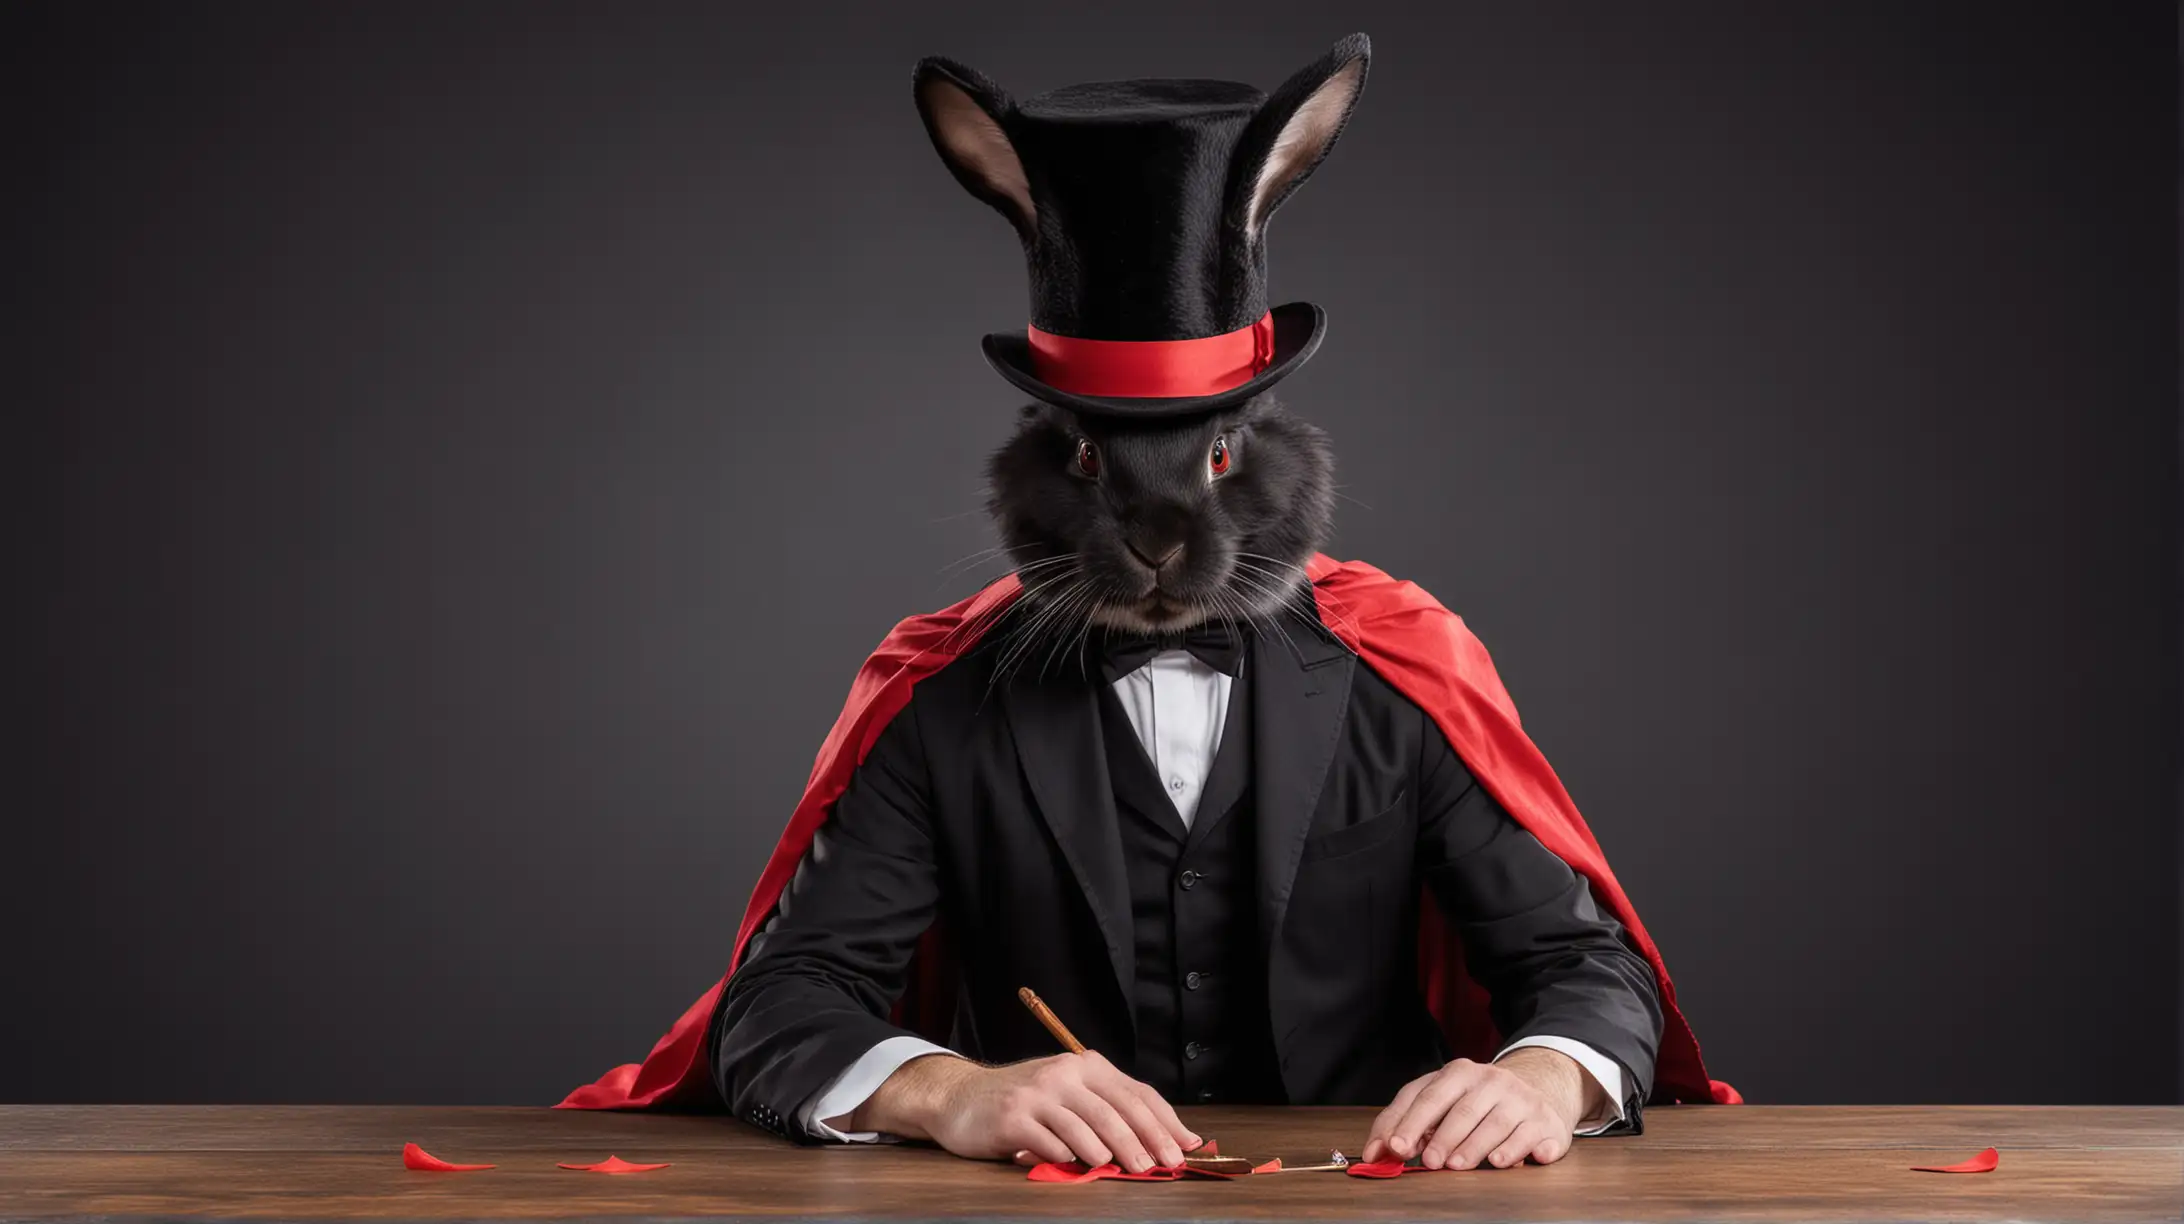 Magician wearing a black suit with red cape, holding a wand, top hat upside down on a table, large bunny ears sticking out of the hat.